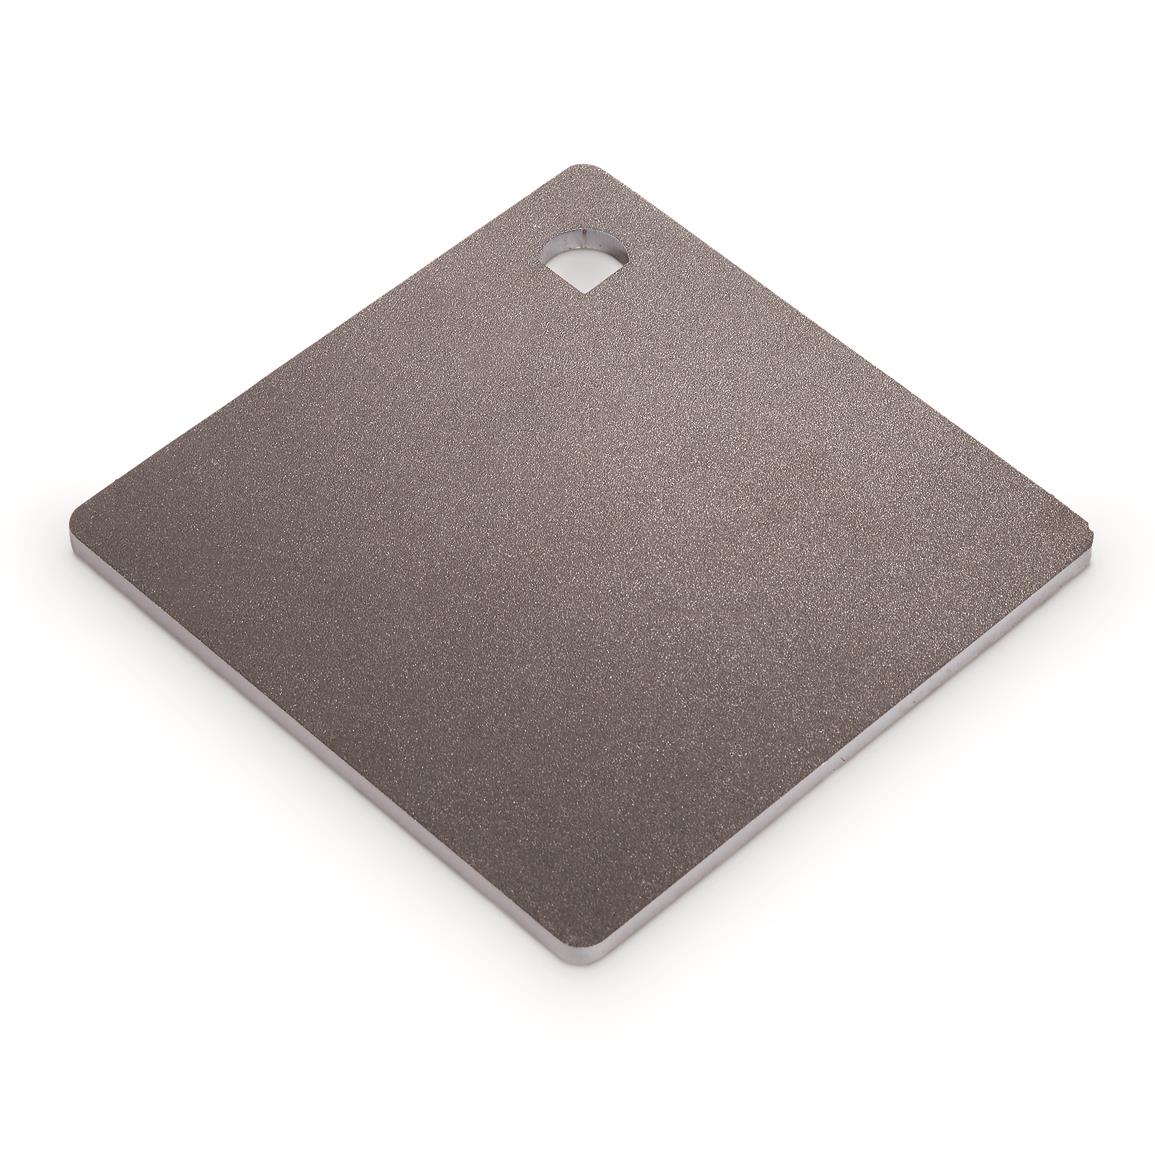 CTS AR500 Hardened Steel Plate Shooting Target, 1/4" Thick